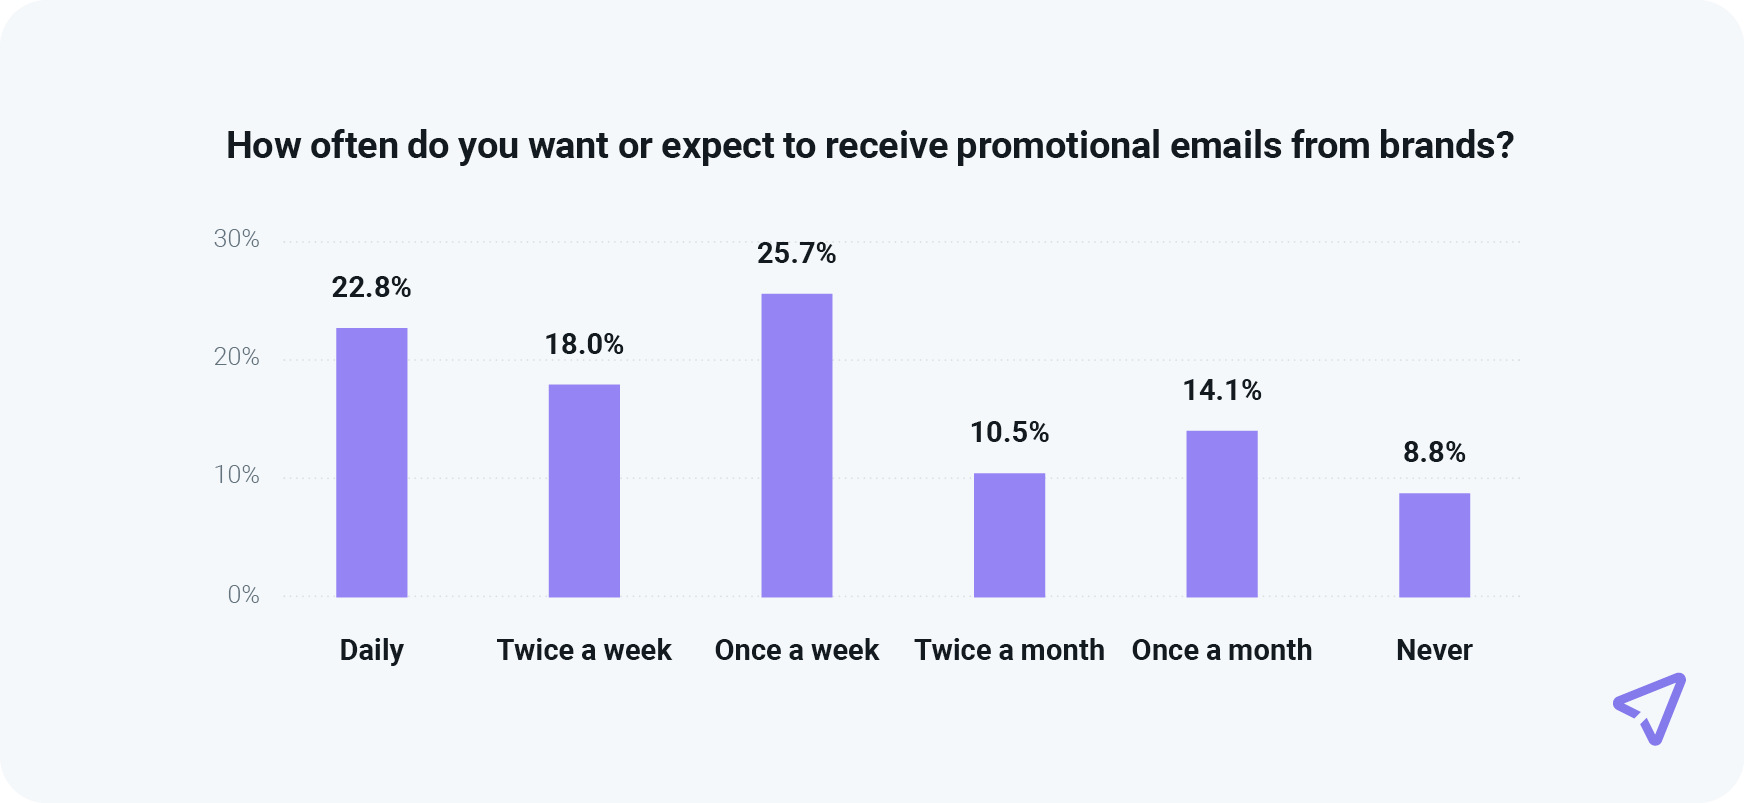 Chart shows varied preferences for promotional email frequency